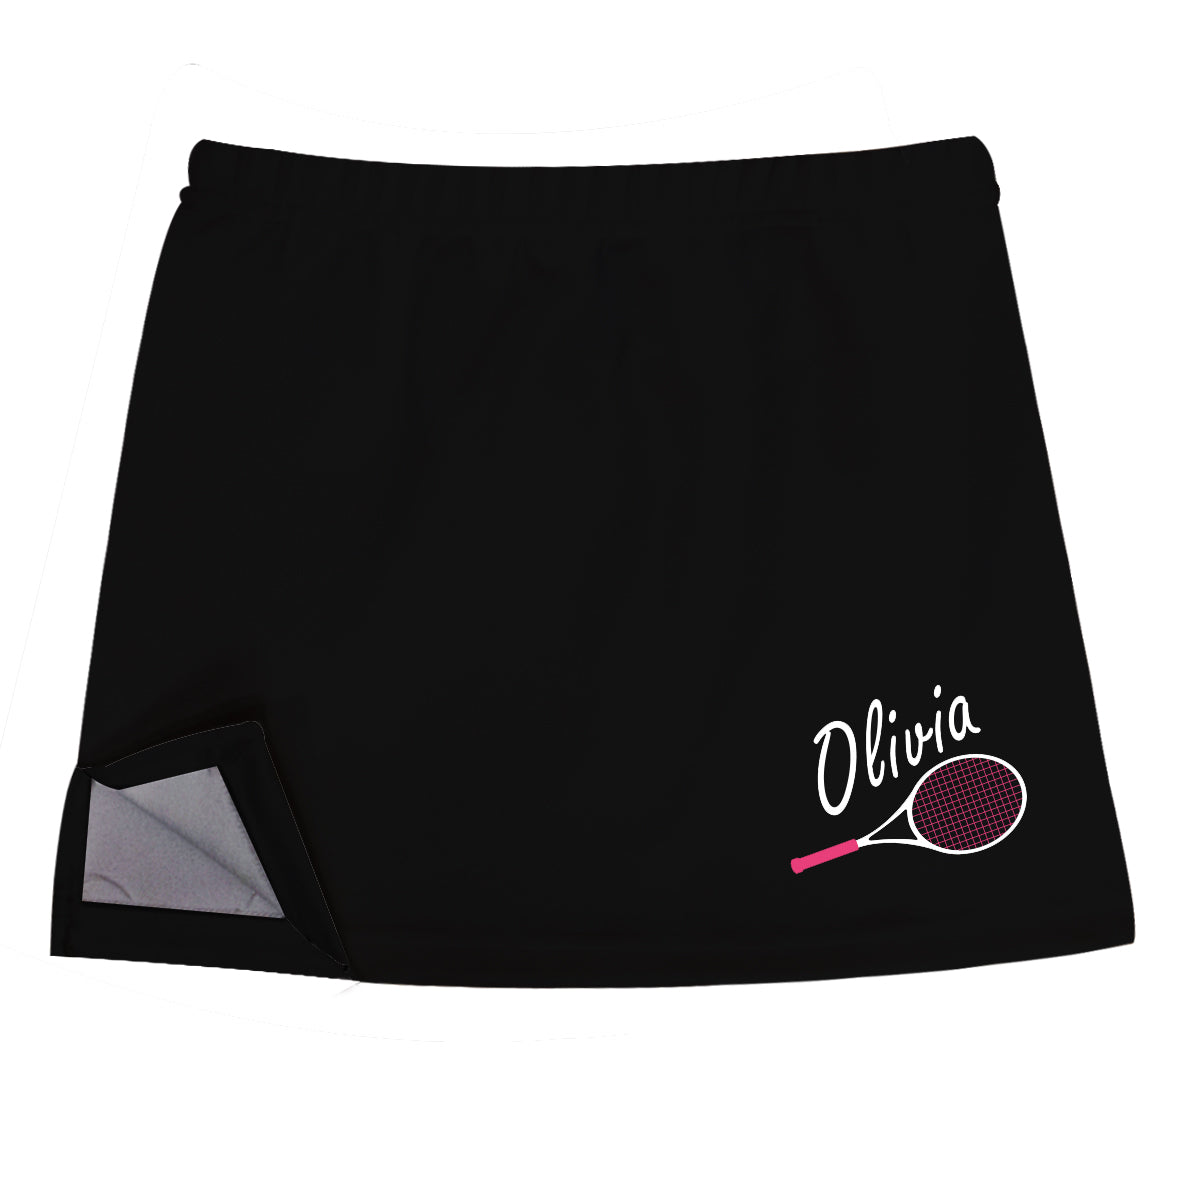 Tennis Name Black Skirt With Side Vents - Wimziy&Co.